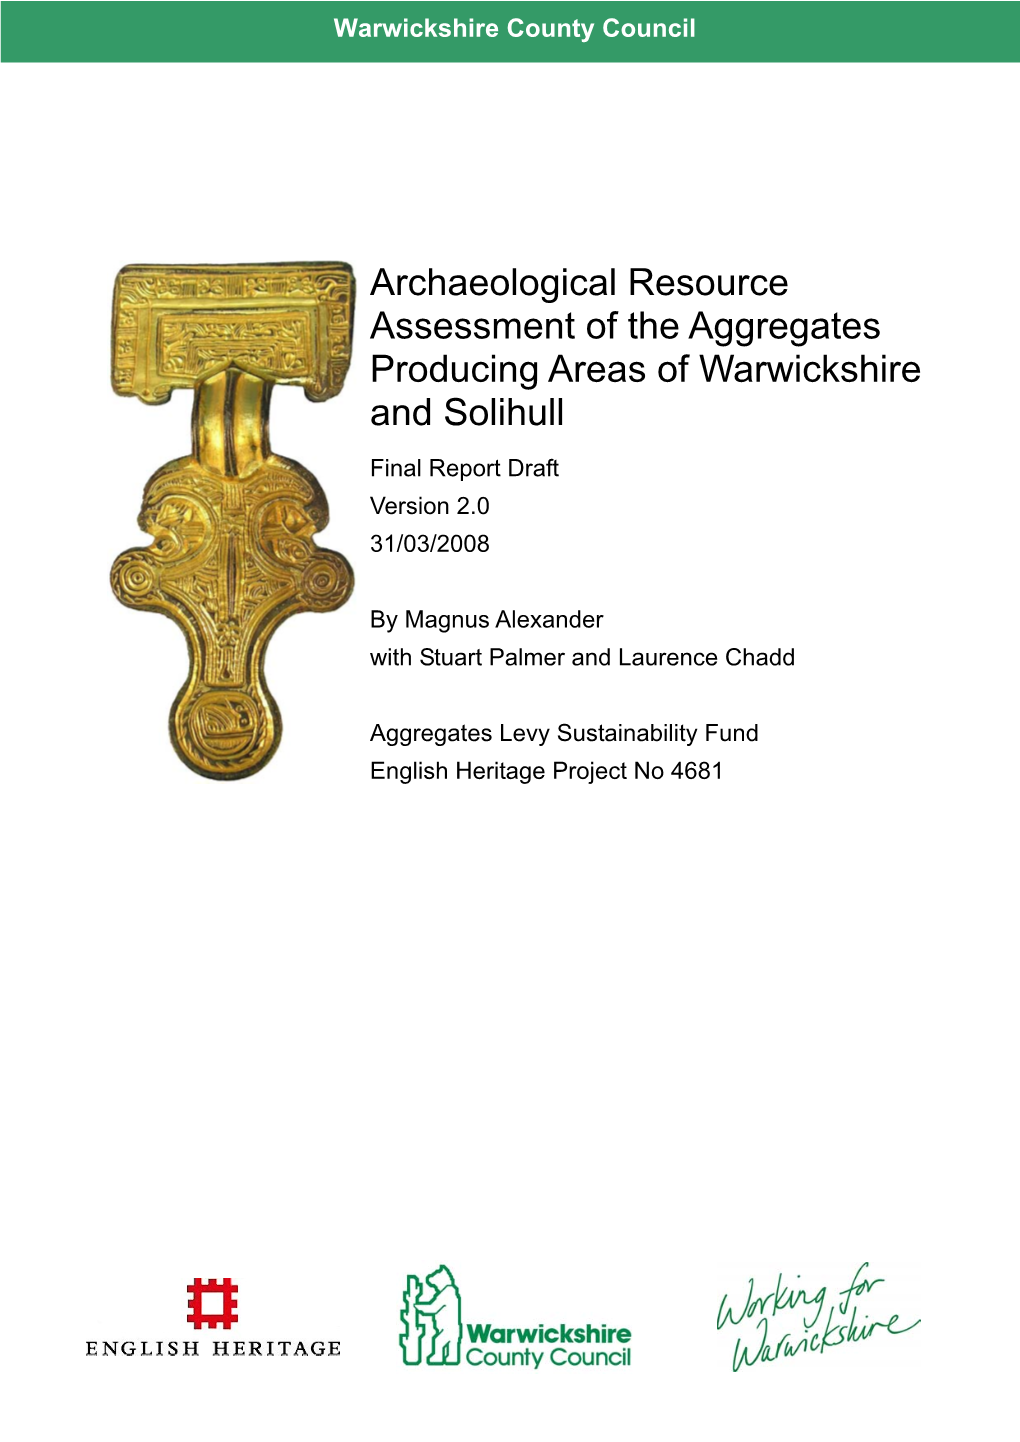 Archaeological Resource Assessment of the Aggregates Producing Areas of Warwickshire and Solihull